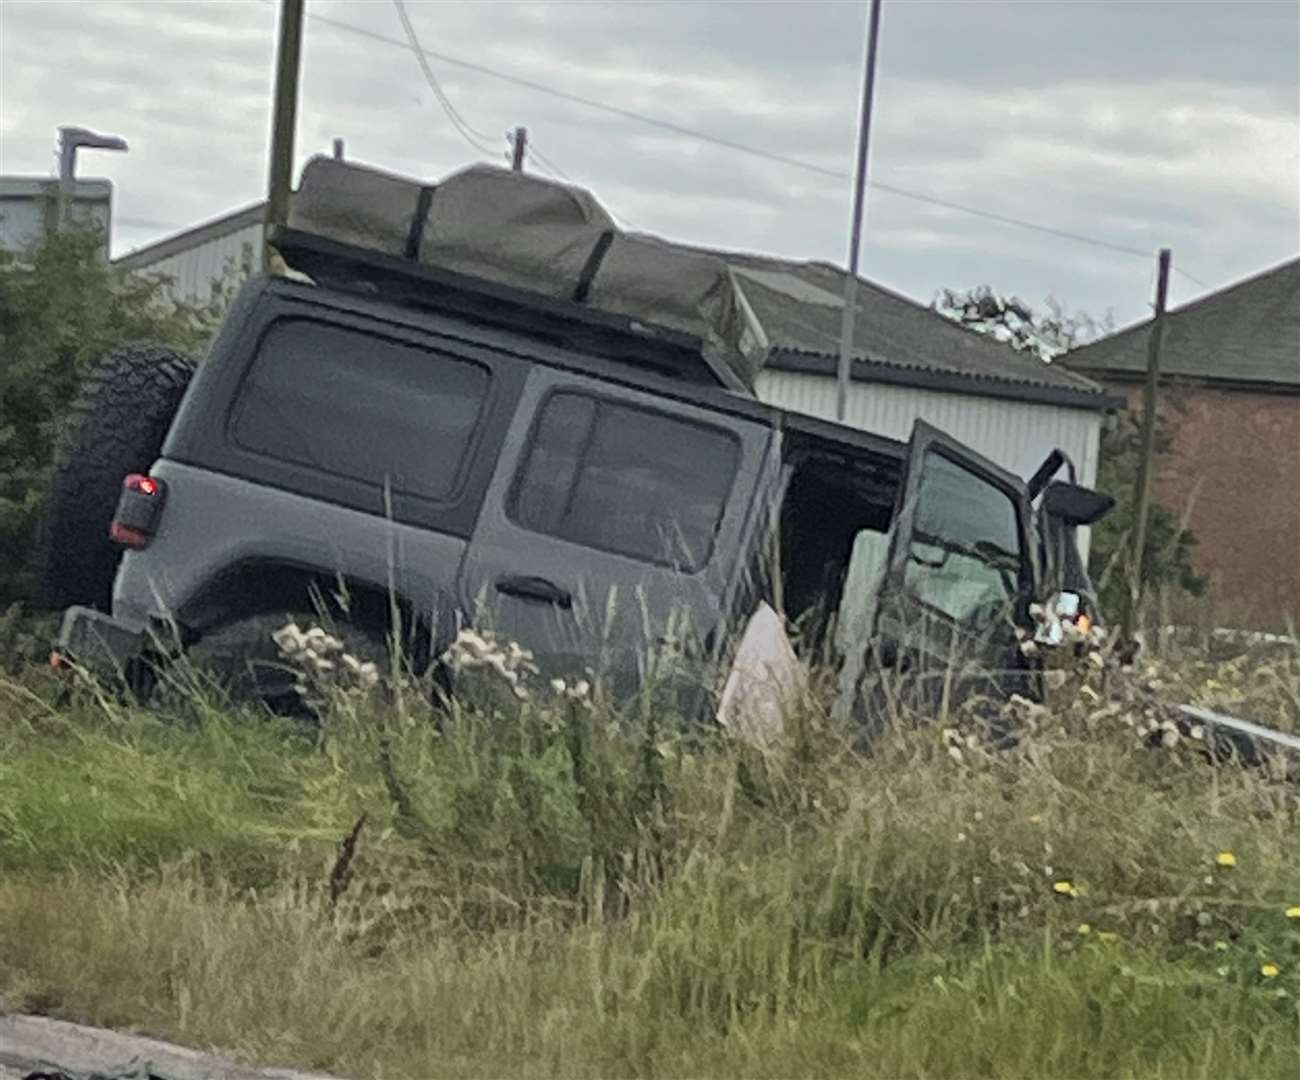 A 4x4 left the road in the crash